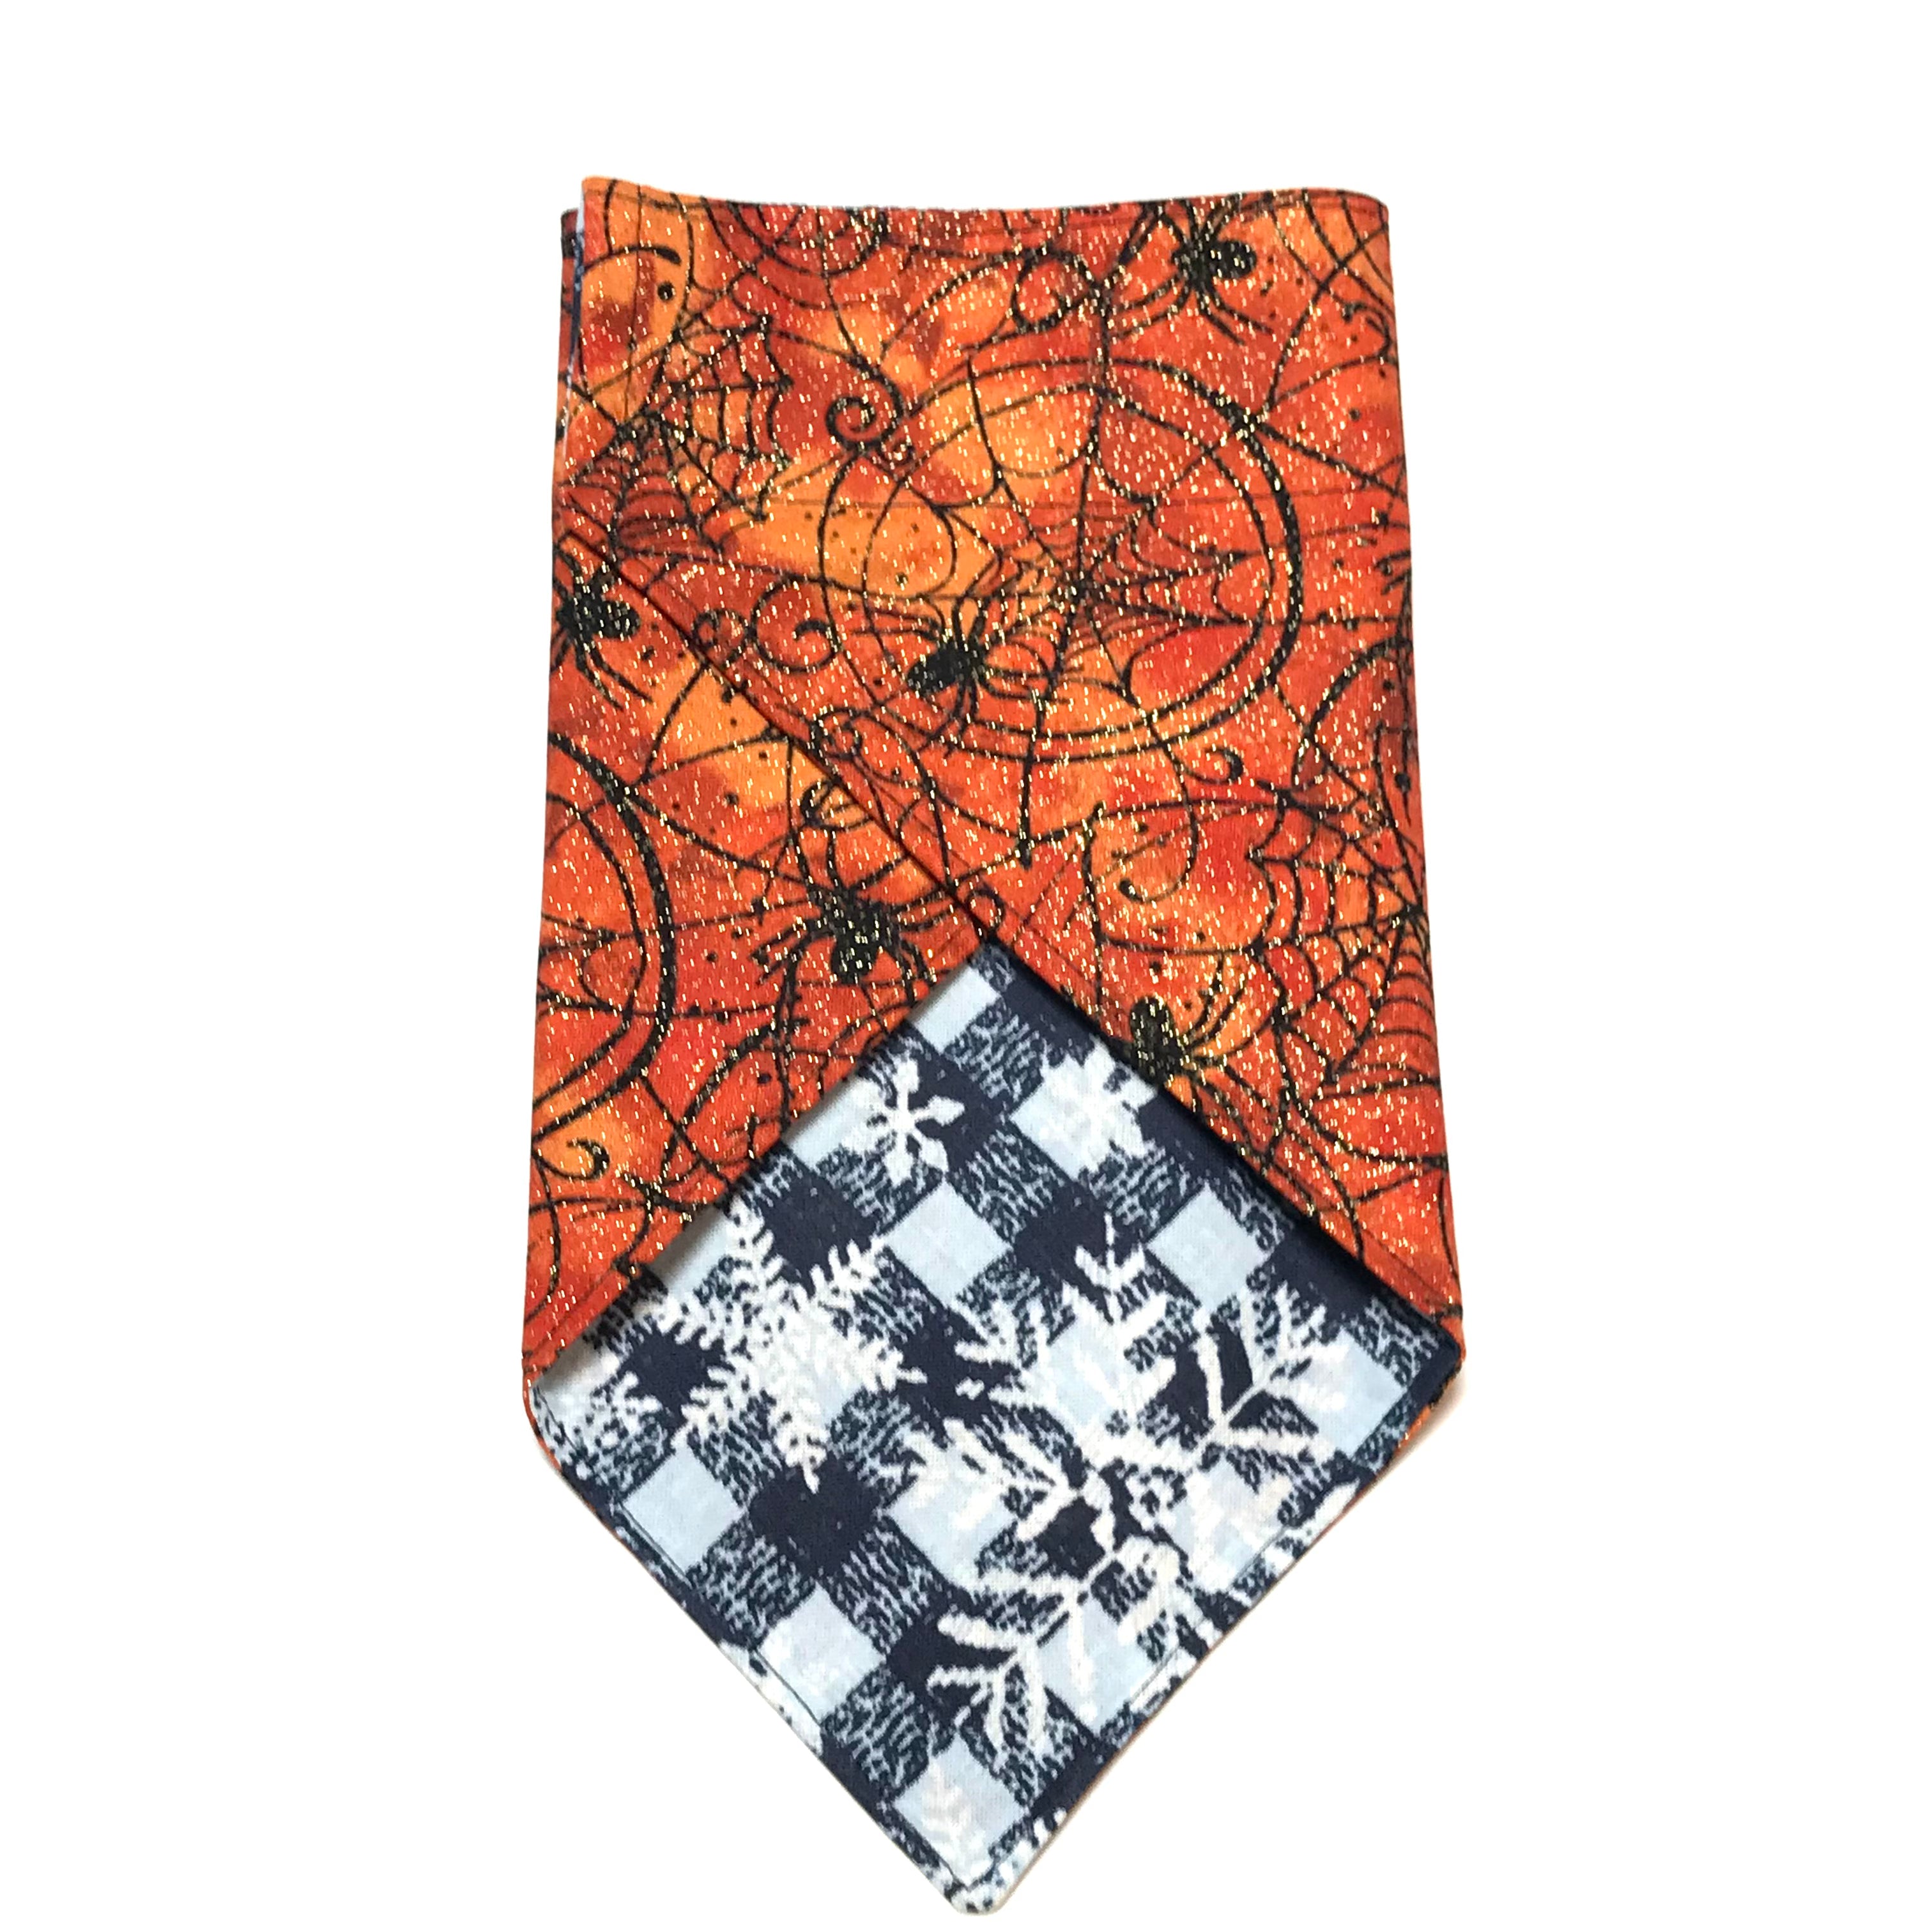 Reversible Dog Scarf - Spider Web/Snowflakes